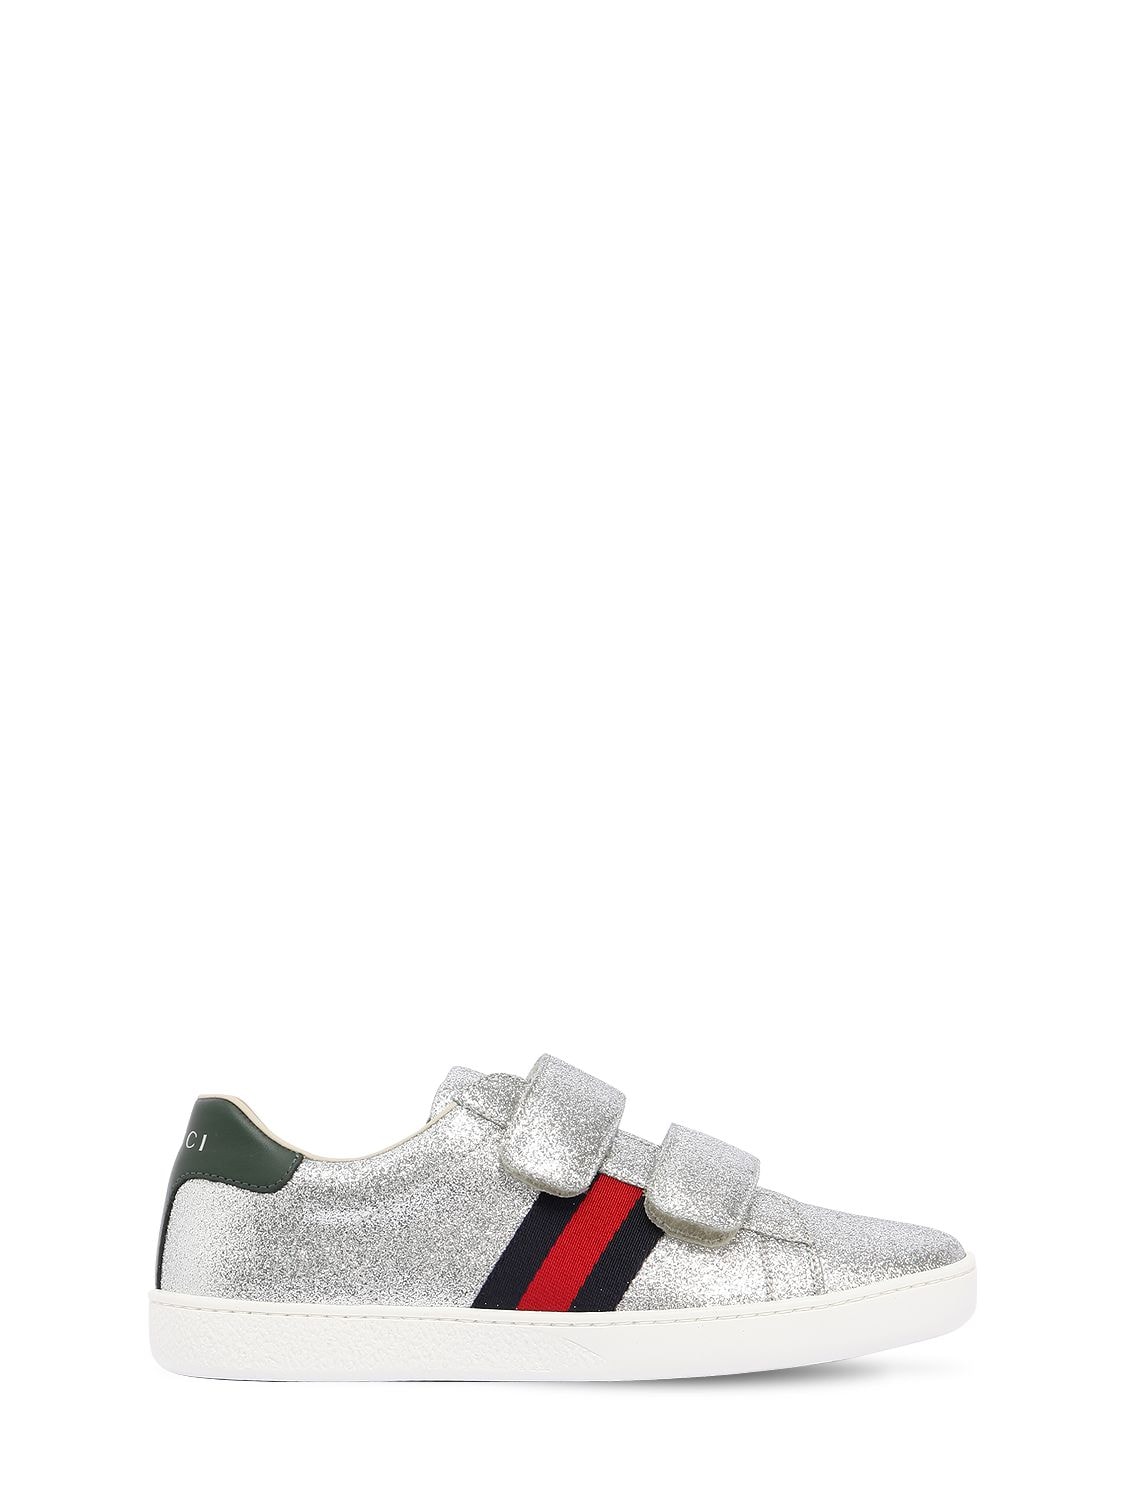 Gucci Kids' Glittered Leather Strap Sneakers In Silver